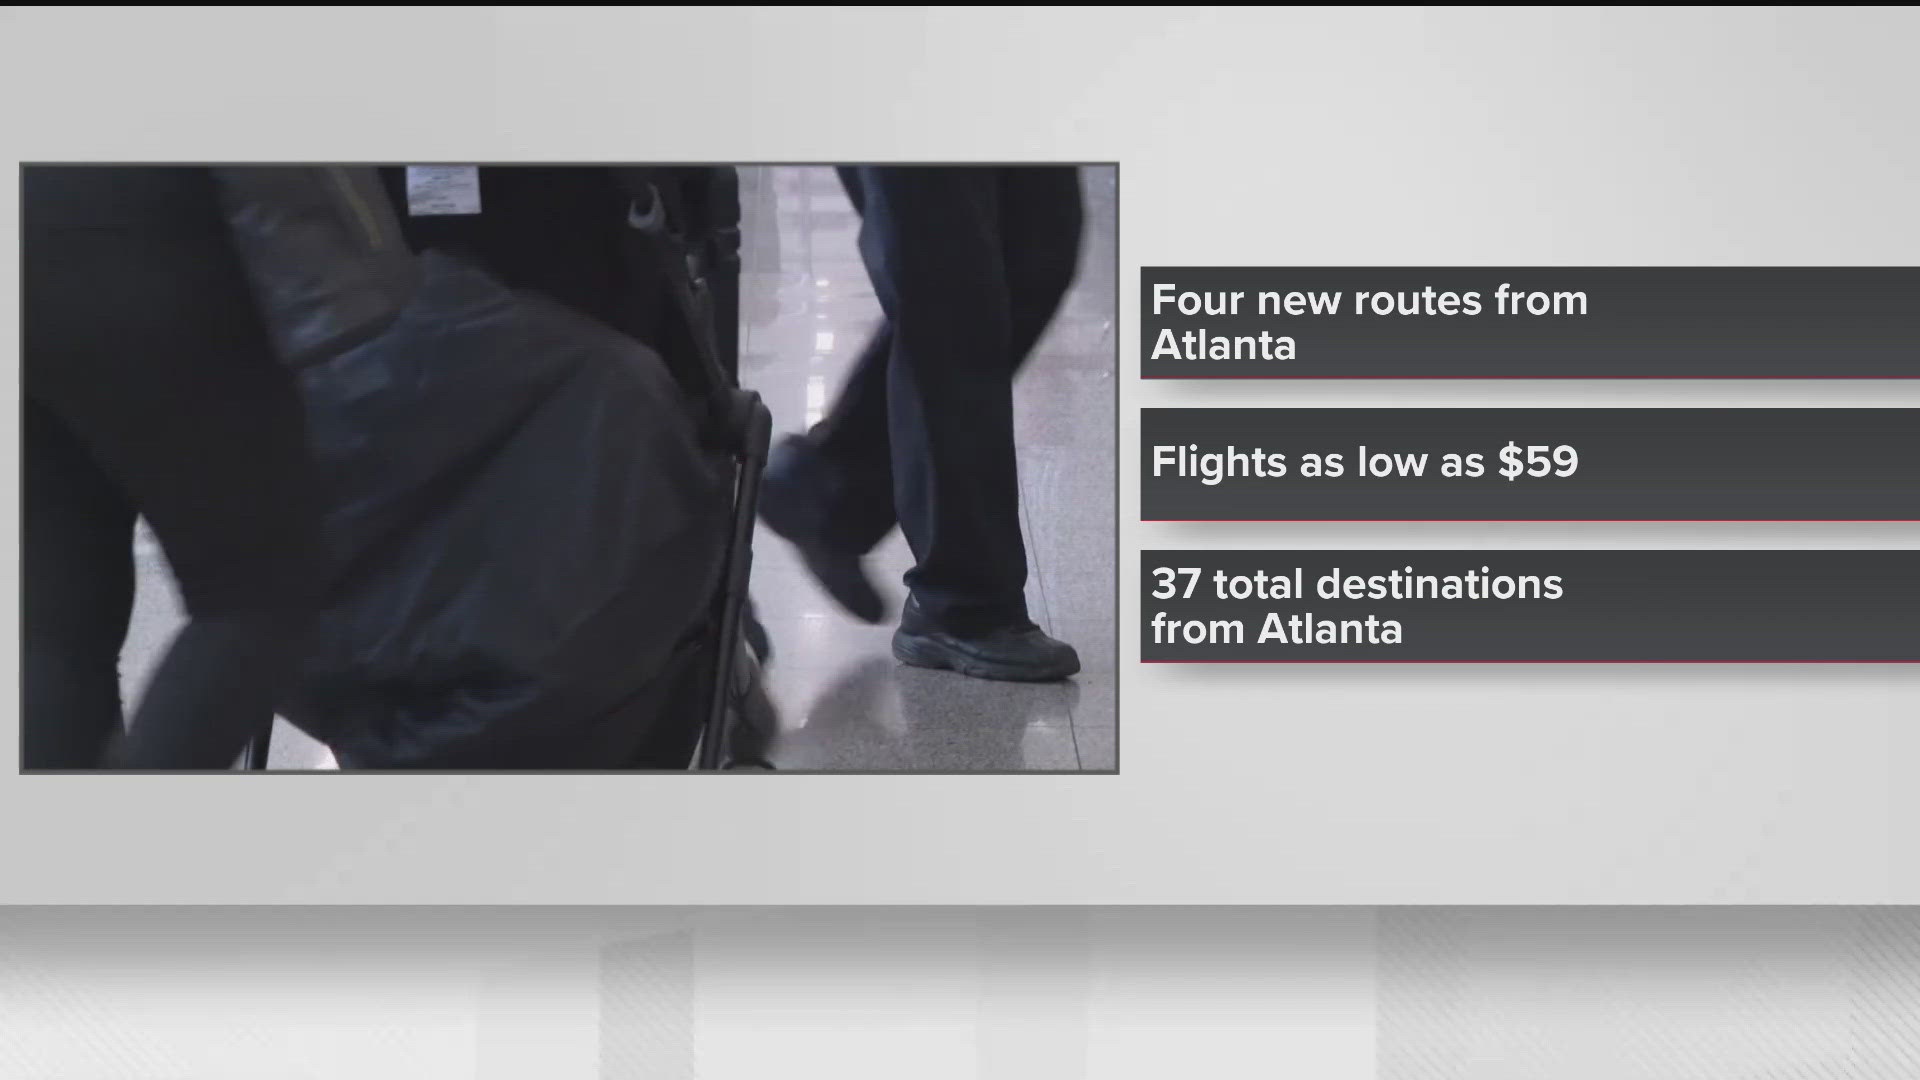 The airline is adding four new routes.